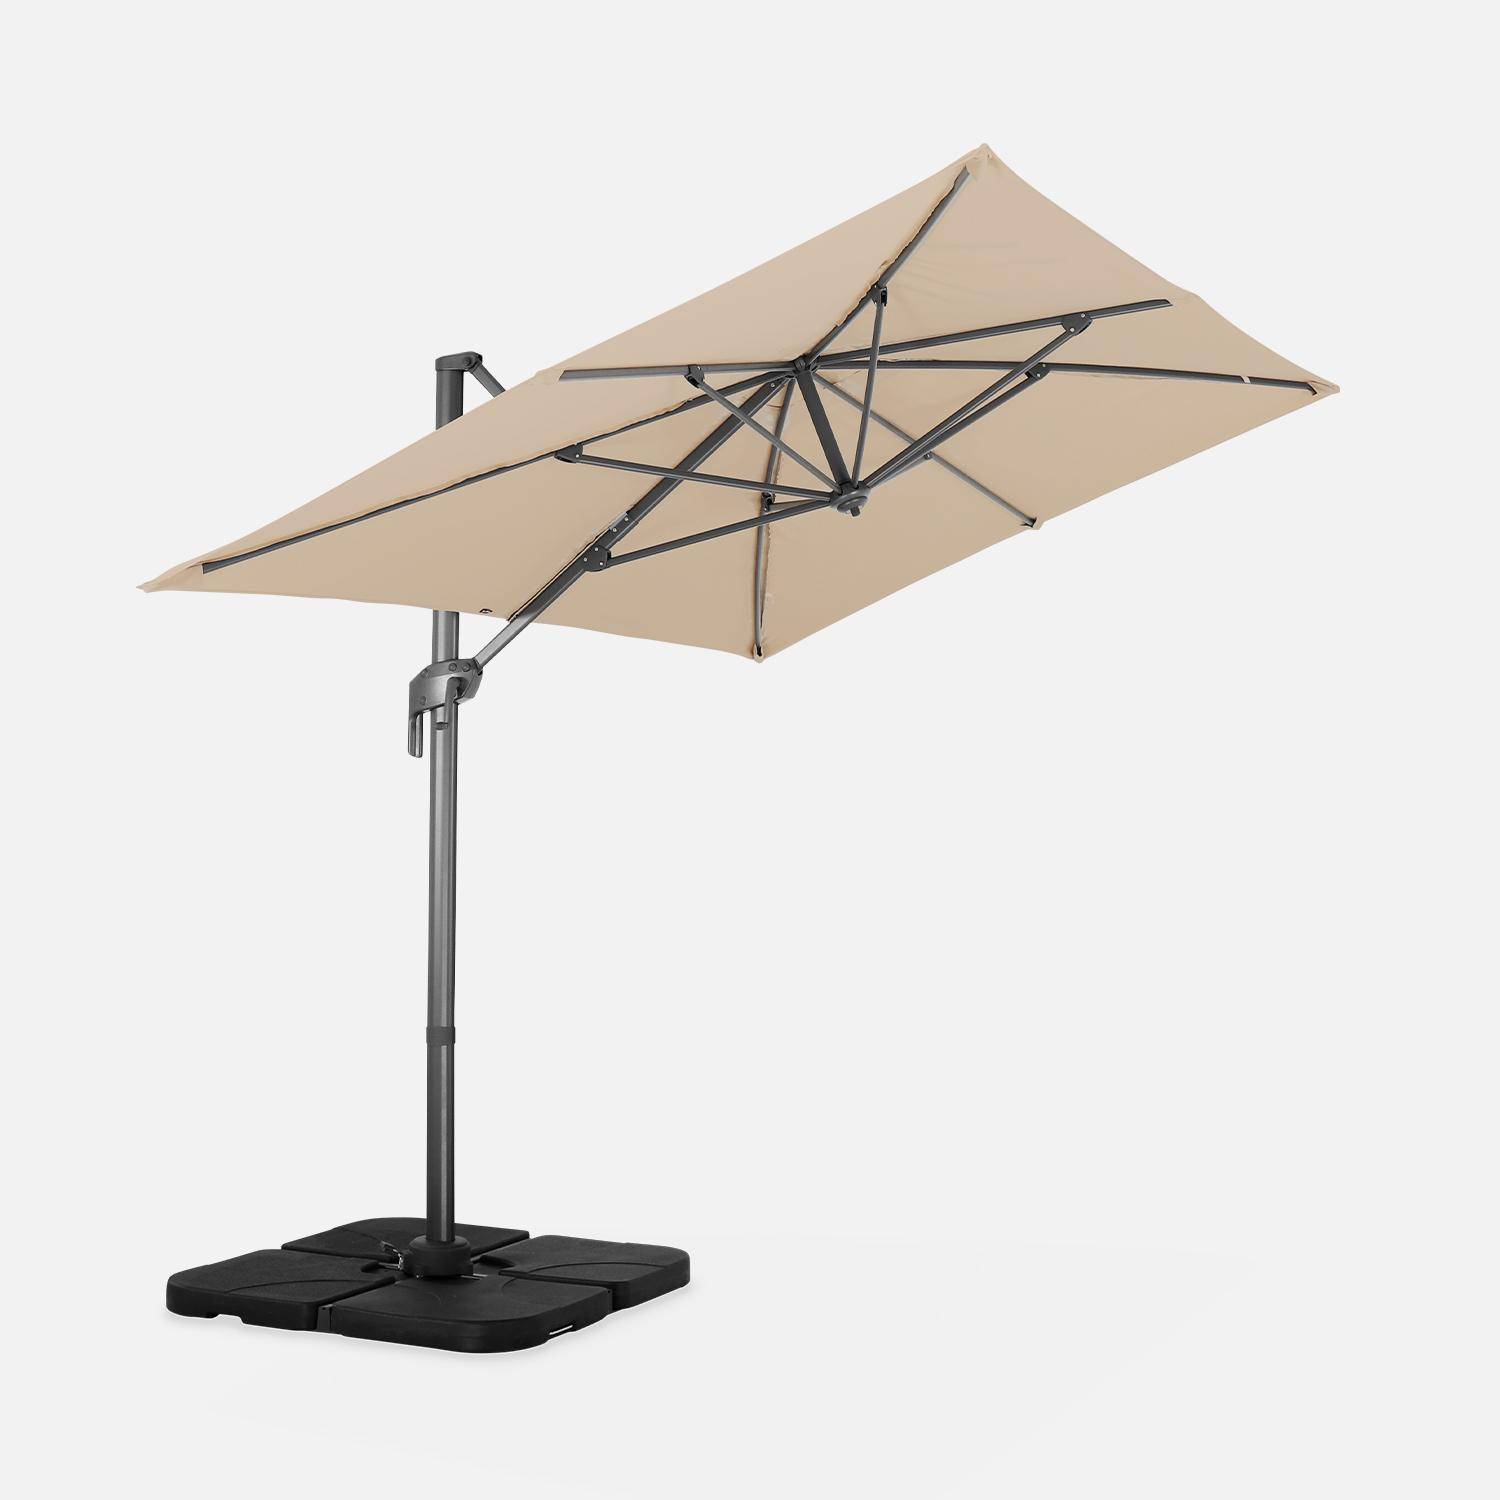 2x3m rectangular cantilever paraso - parasol can be tilted, folded and rotated 360 degreesl - Antibes - Beige Photo4